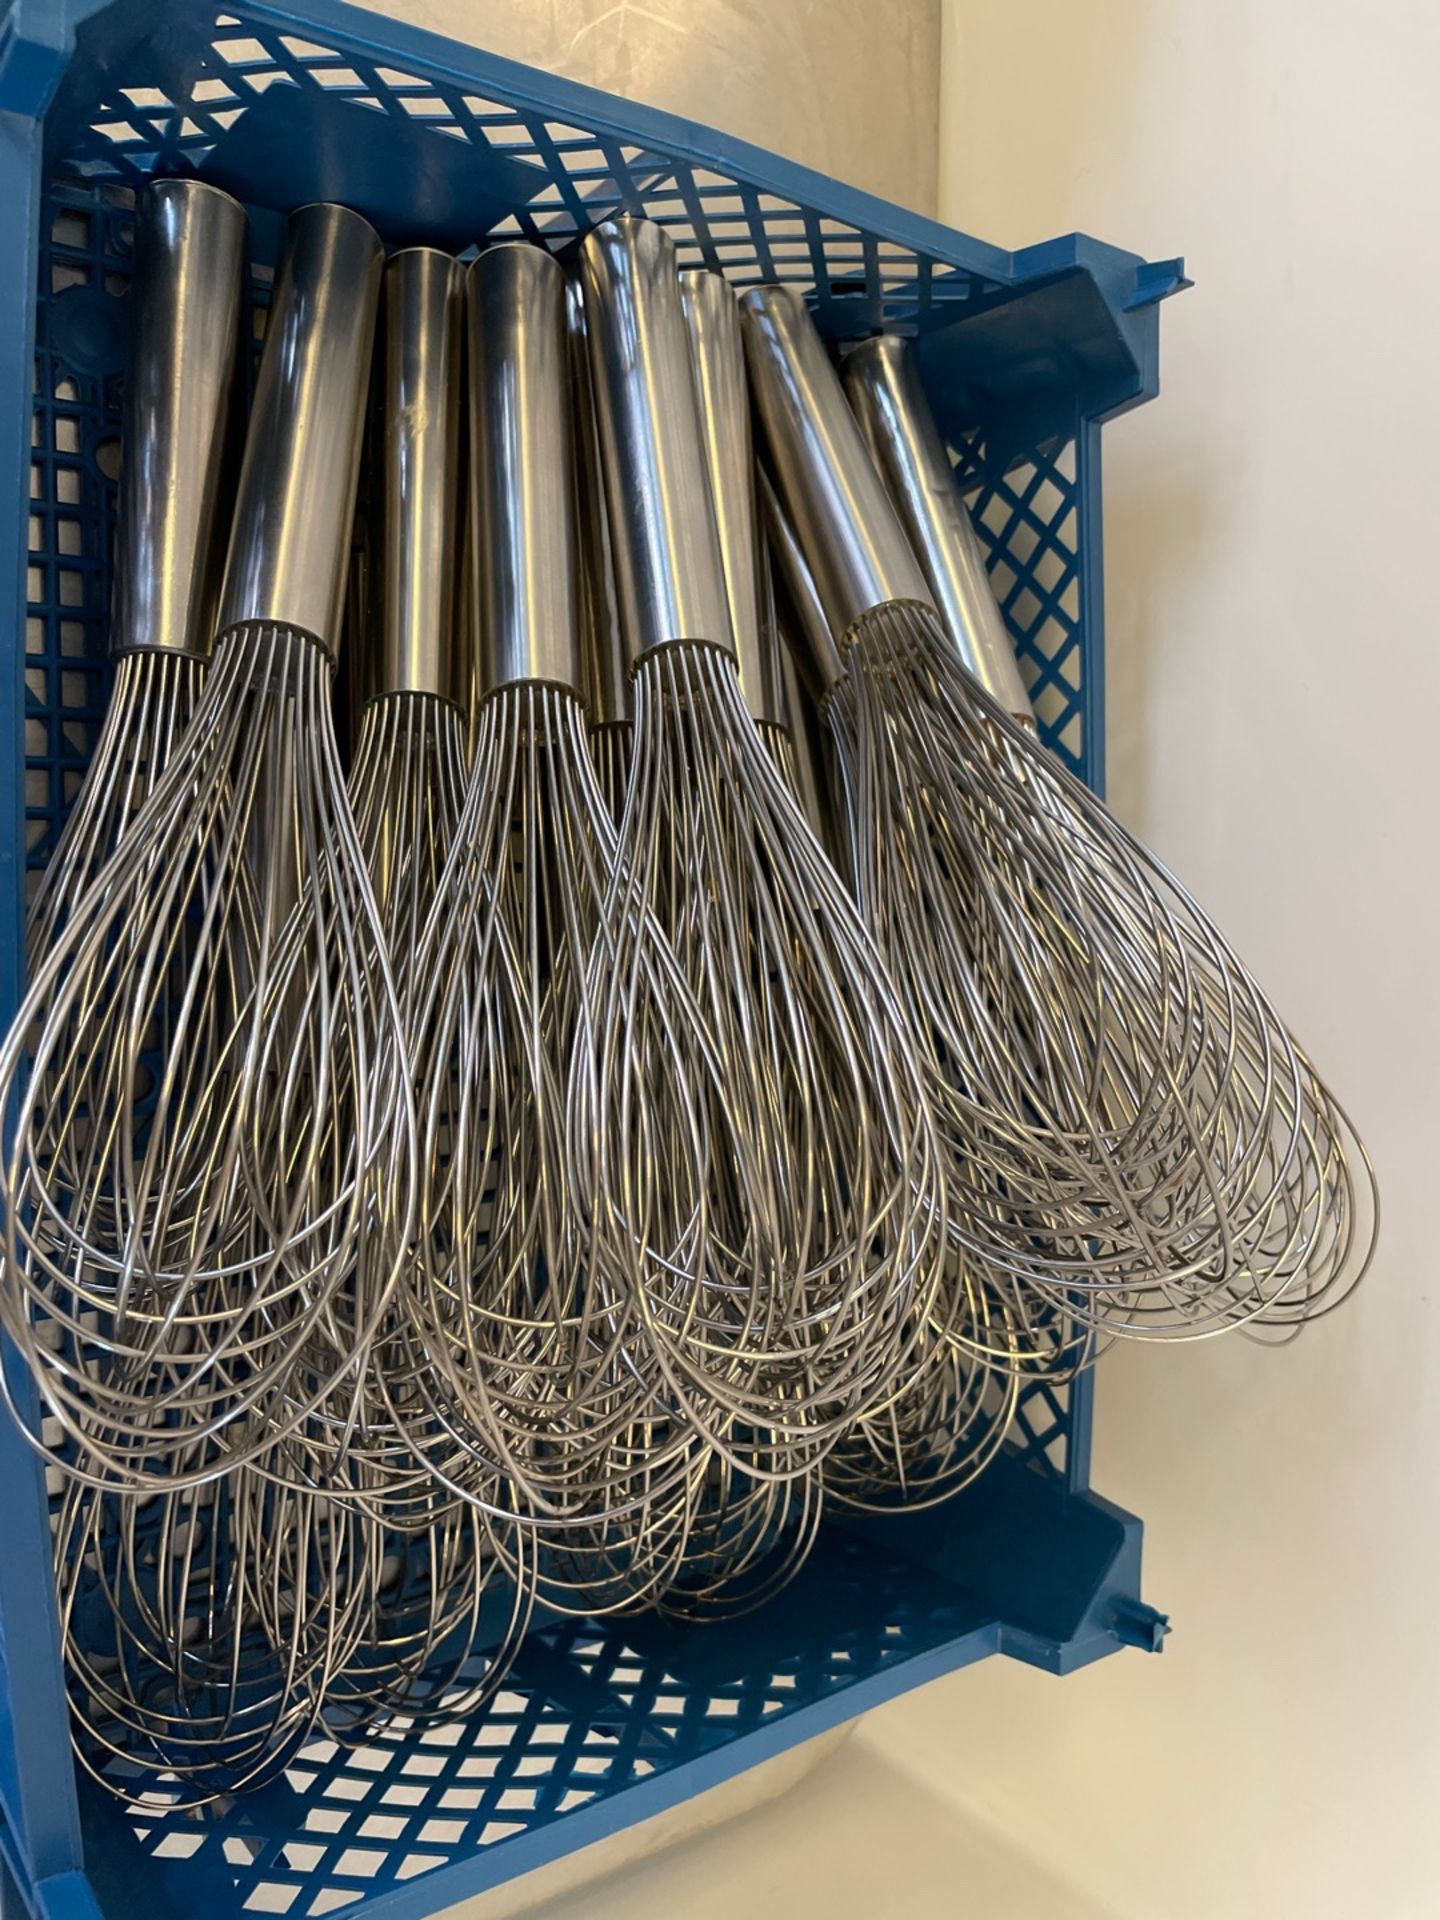 Selection Of Whisks